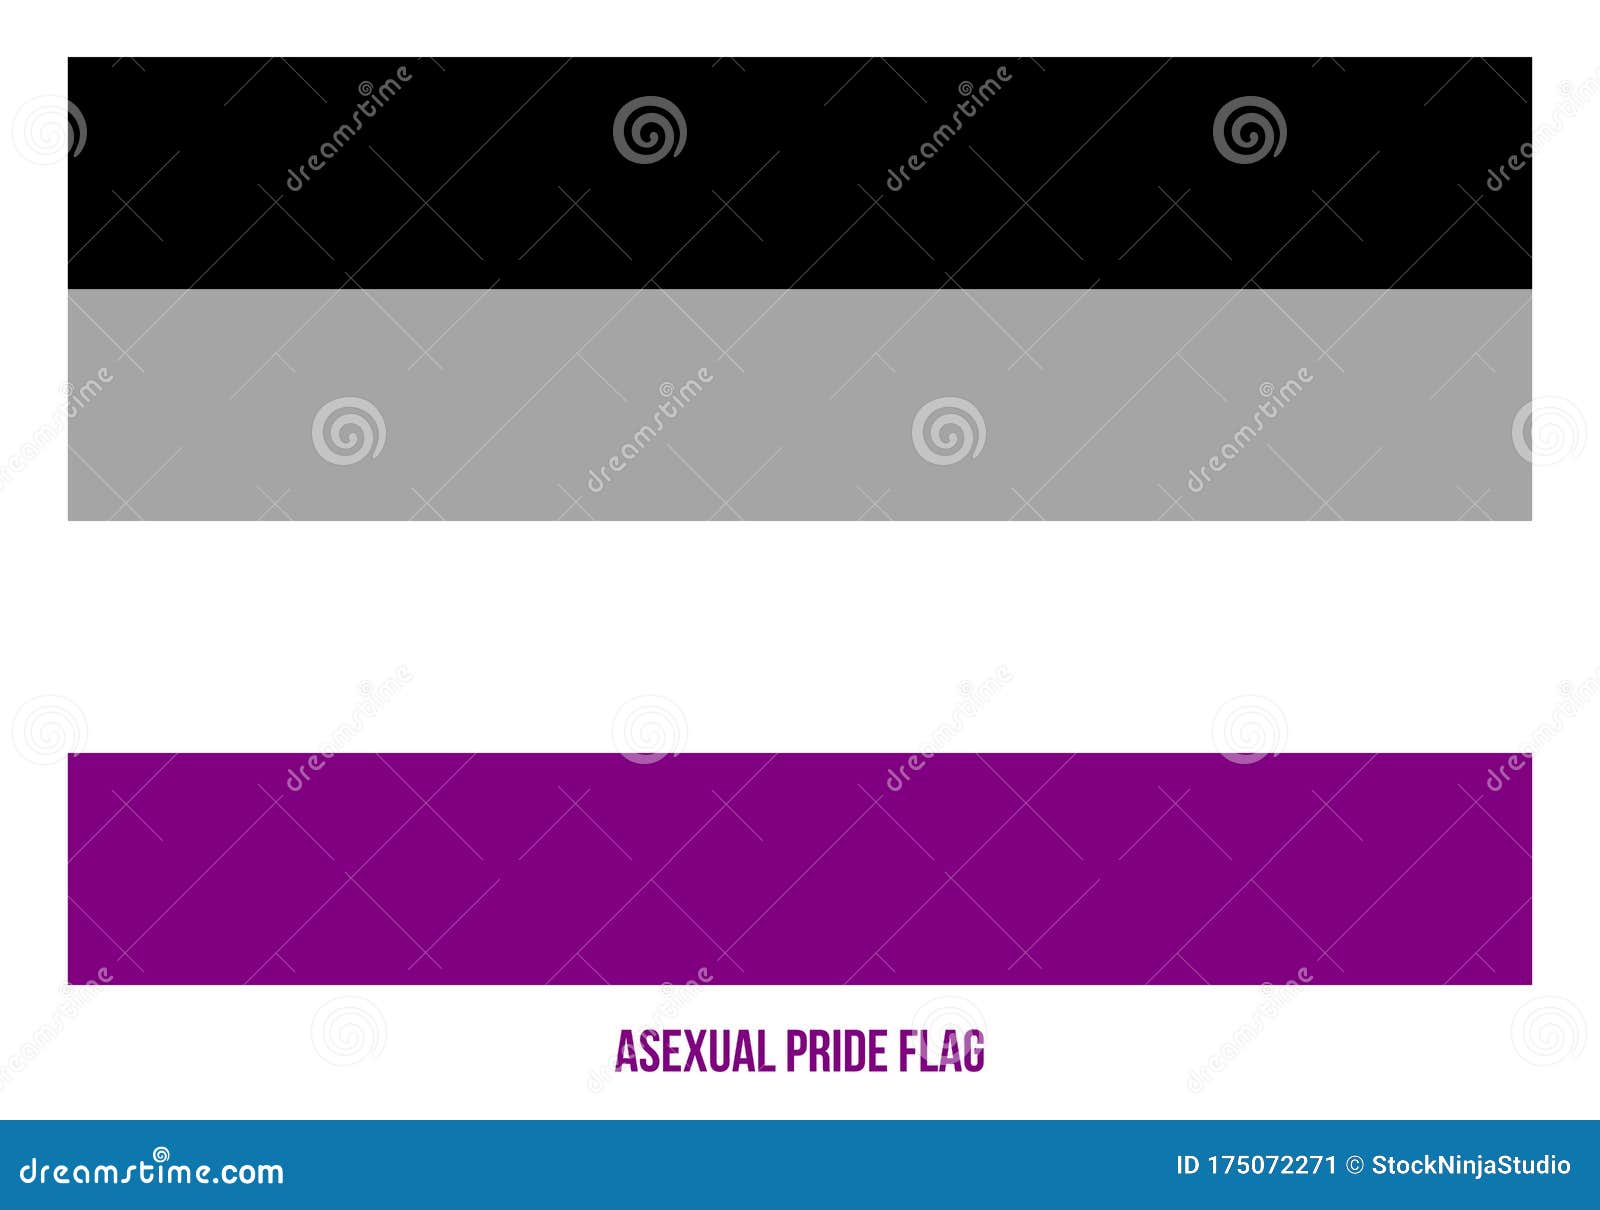 Asexual Pride Flag Vector Illustration Designed with Correct Color Scheme  Stock Vector - Illustration of gender, peace: 175072271